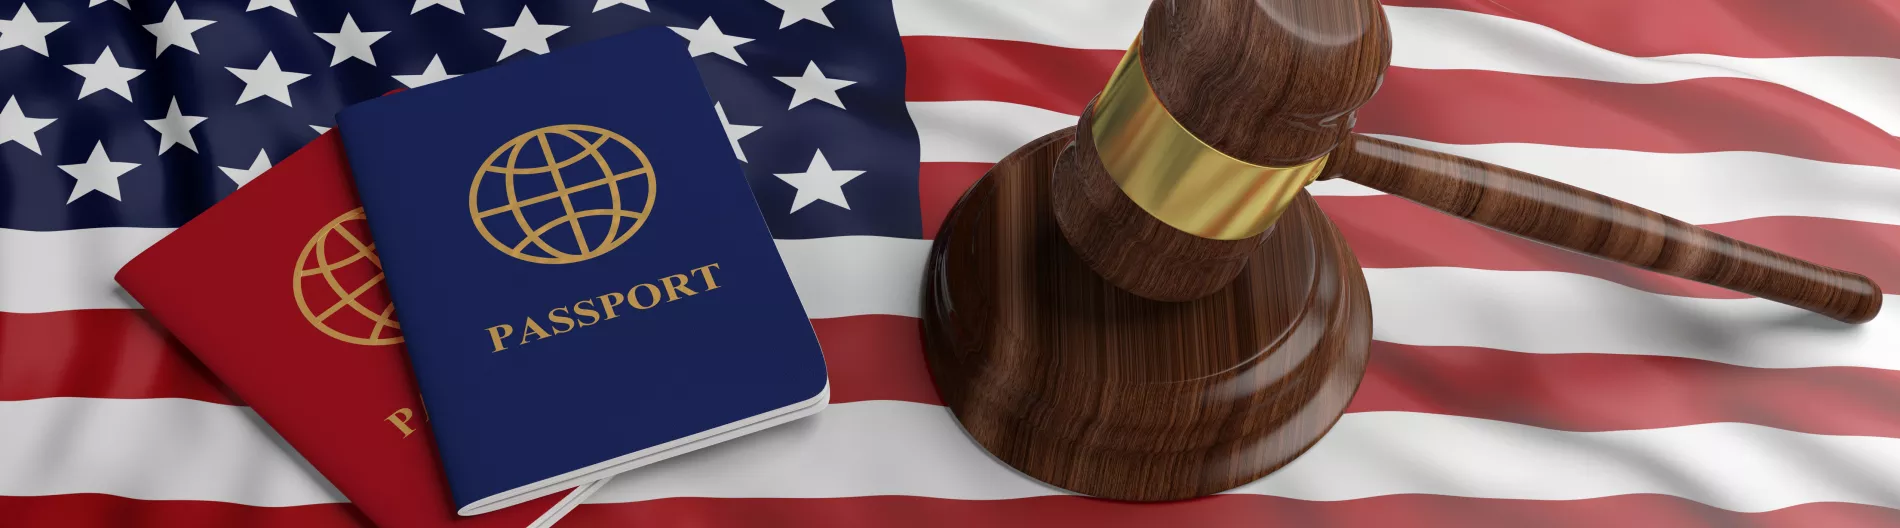 United States flag with passport and gavel